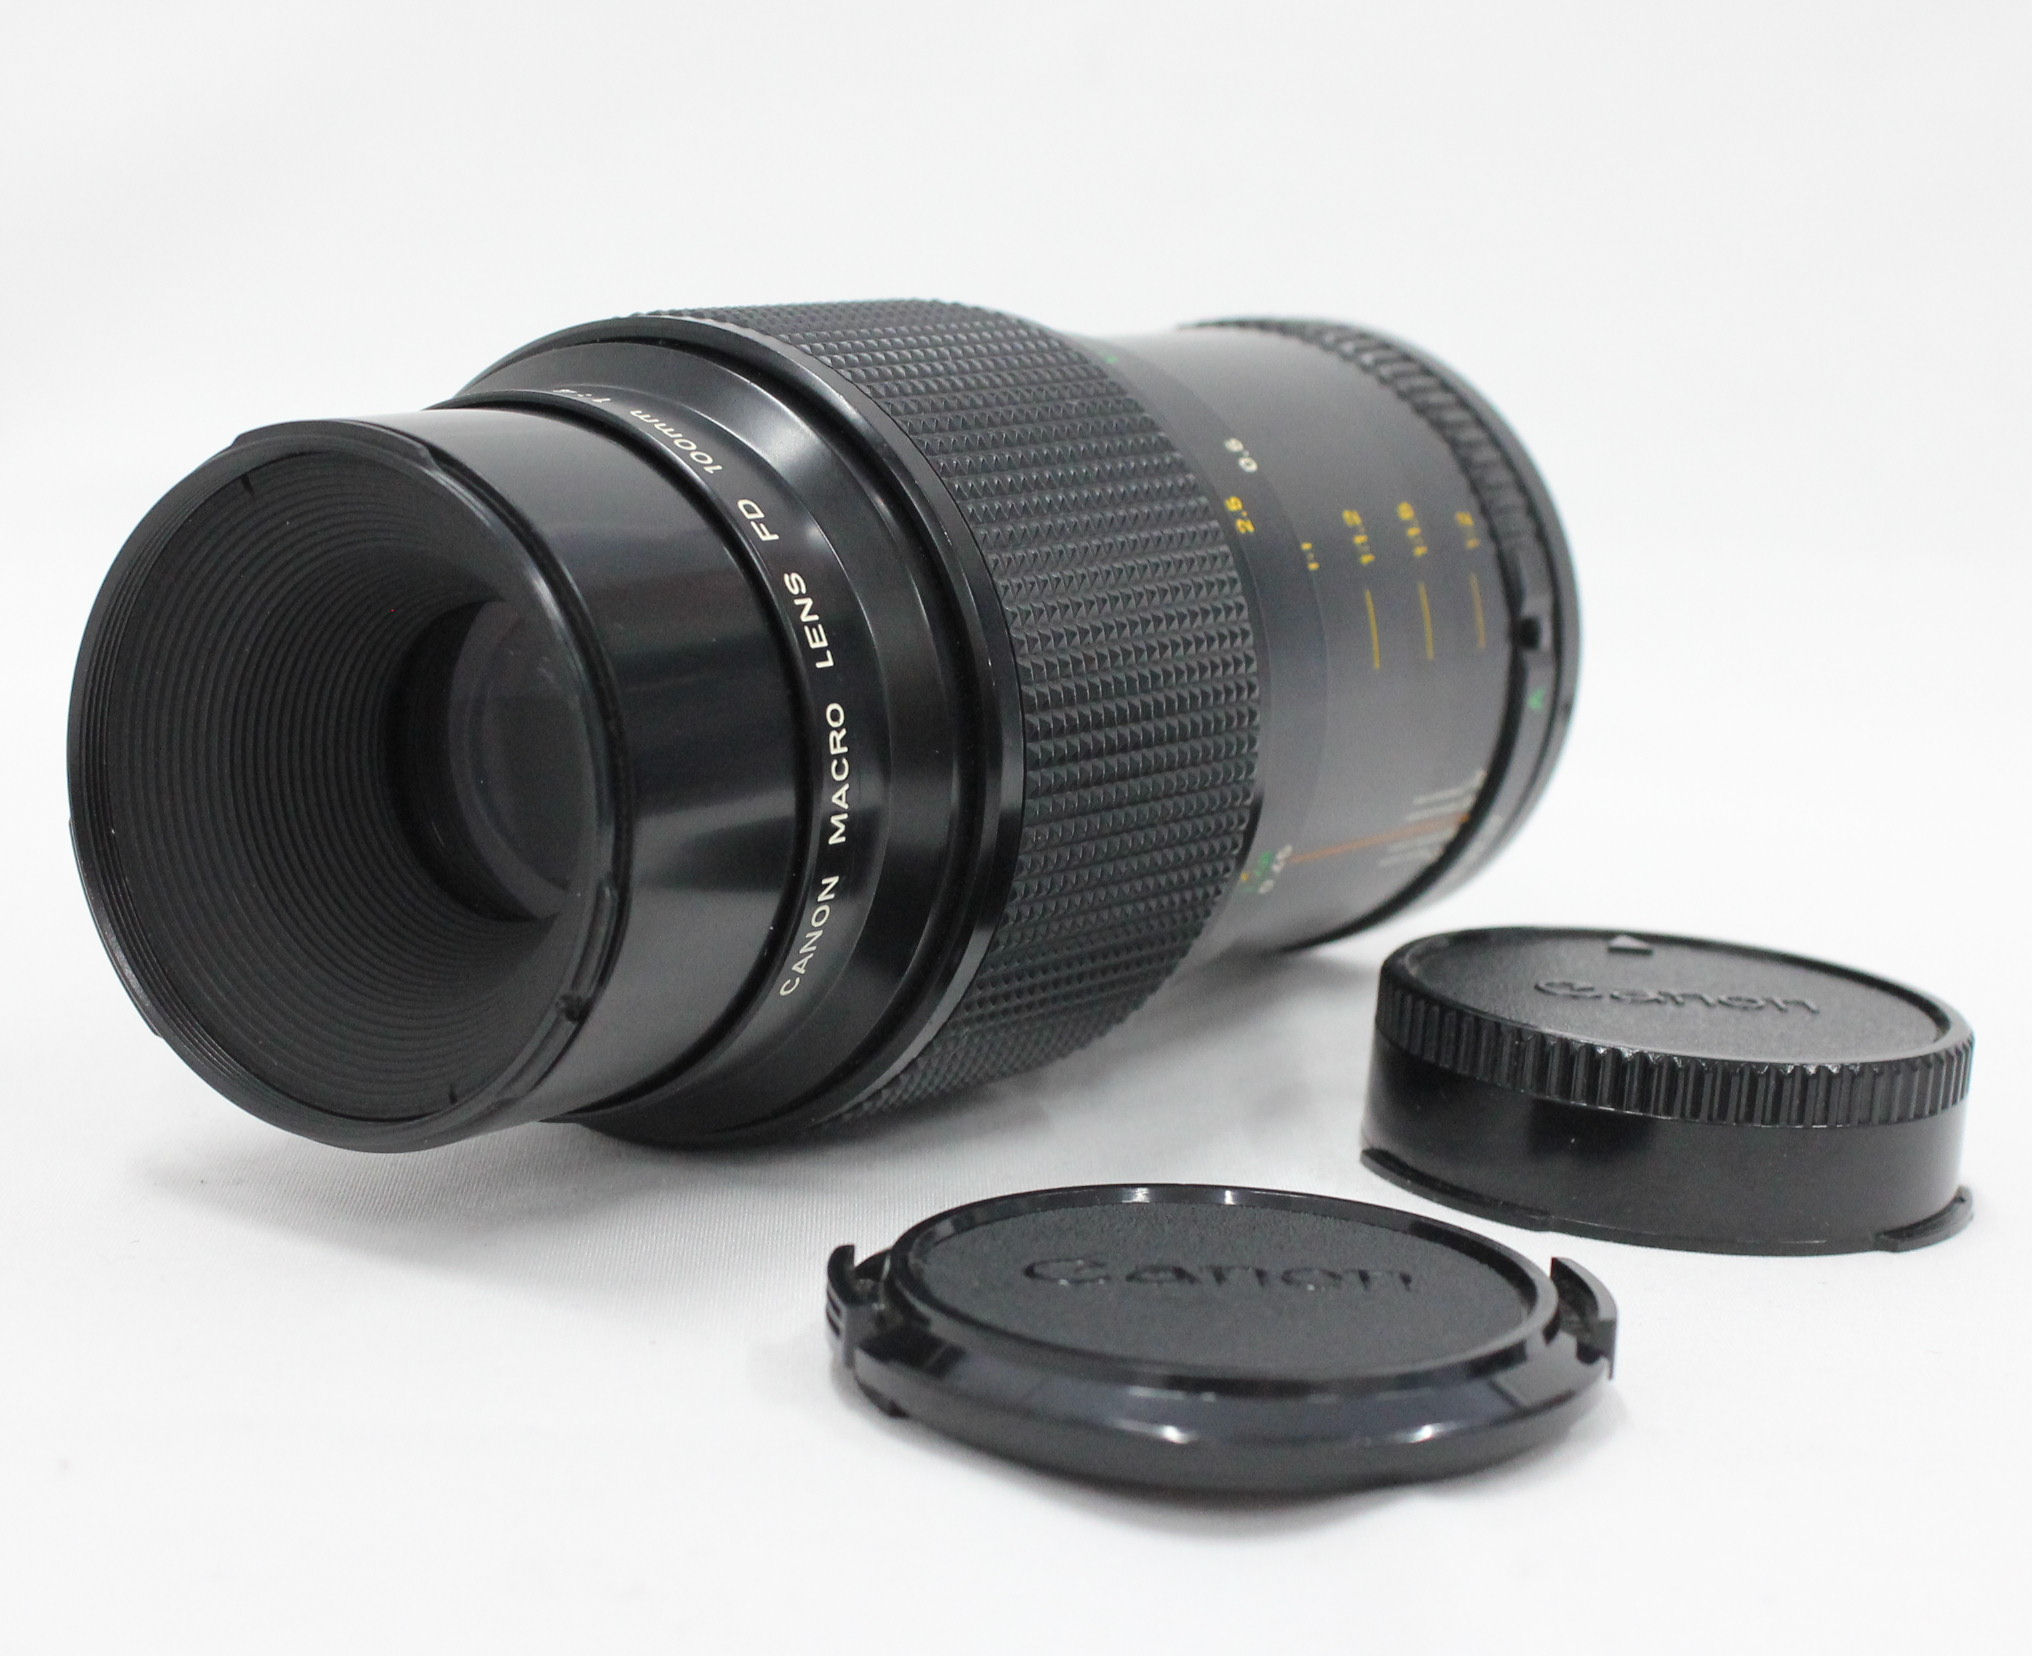 Japan Used Camera Shop | [Excellent+++++] Canon New FD NFD 100mm F/4 MF Macro Lens from Japan